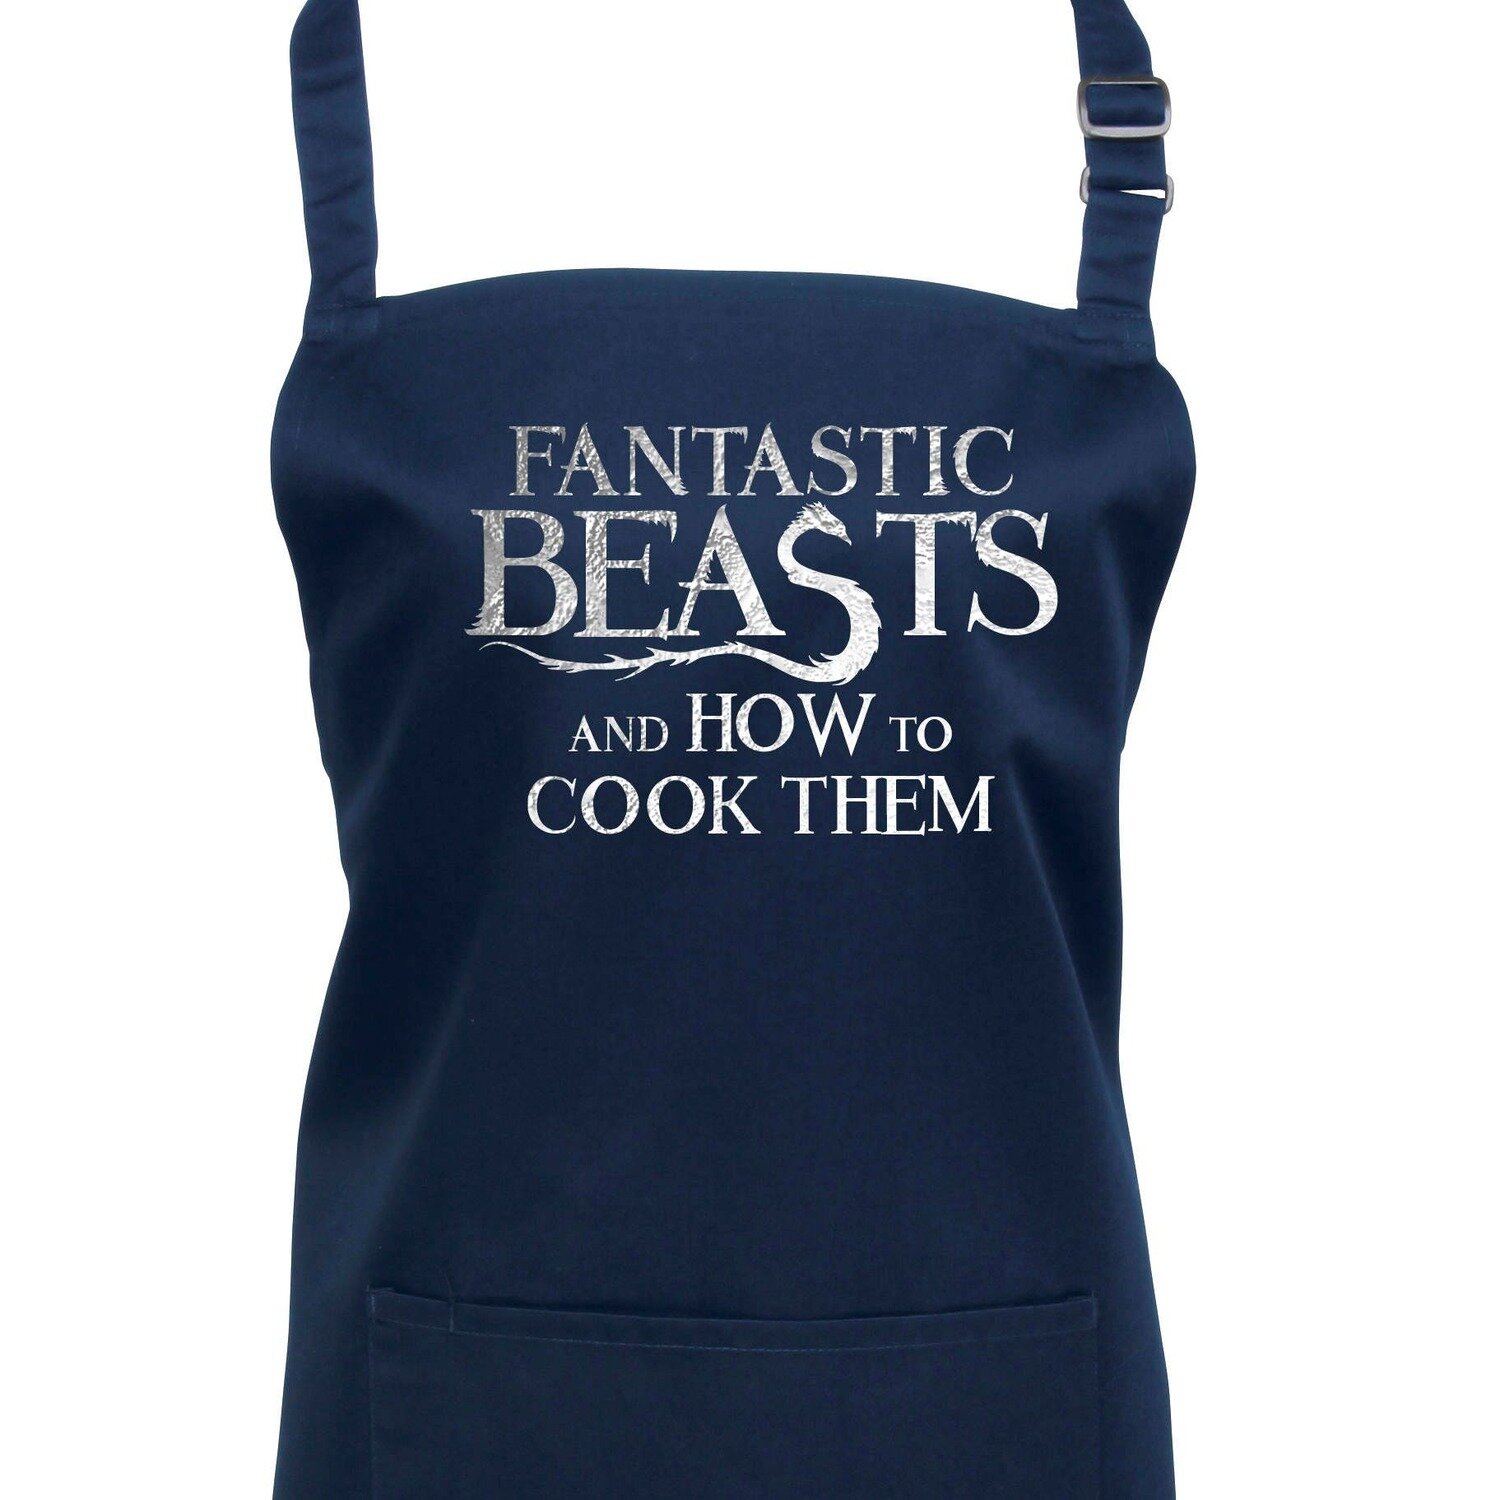 Fantastic Beasts And How To Cook Them. 23 Colour Choises.